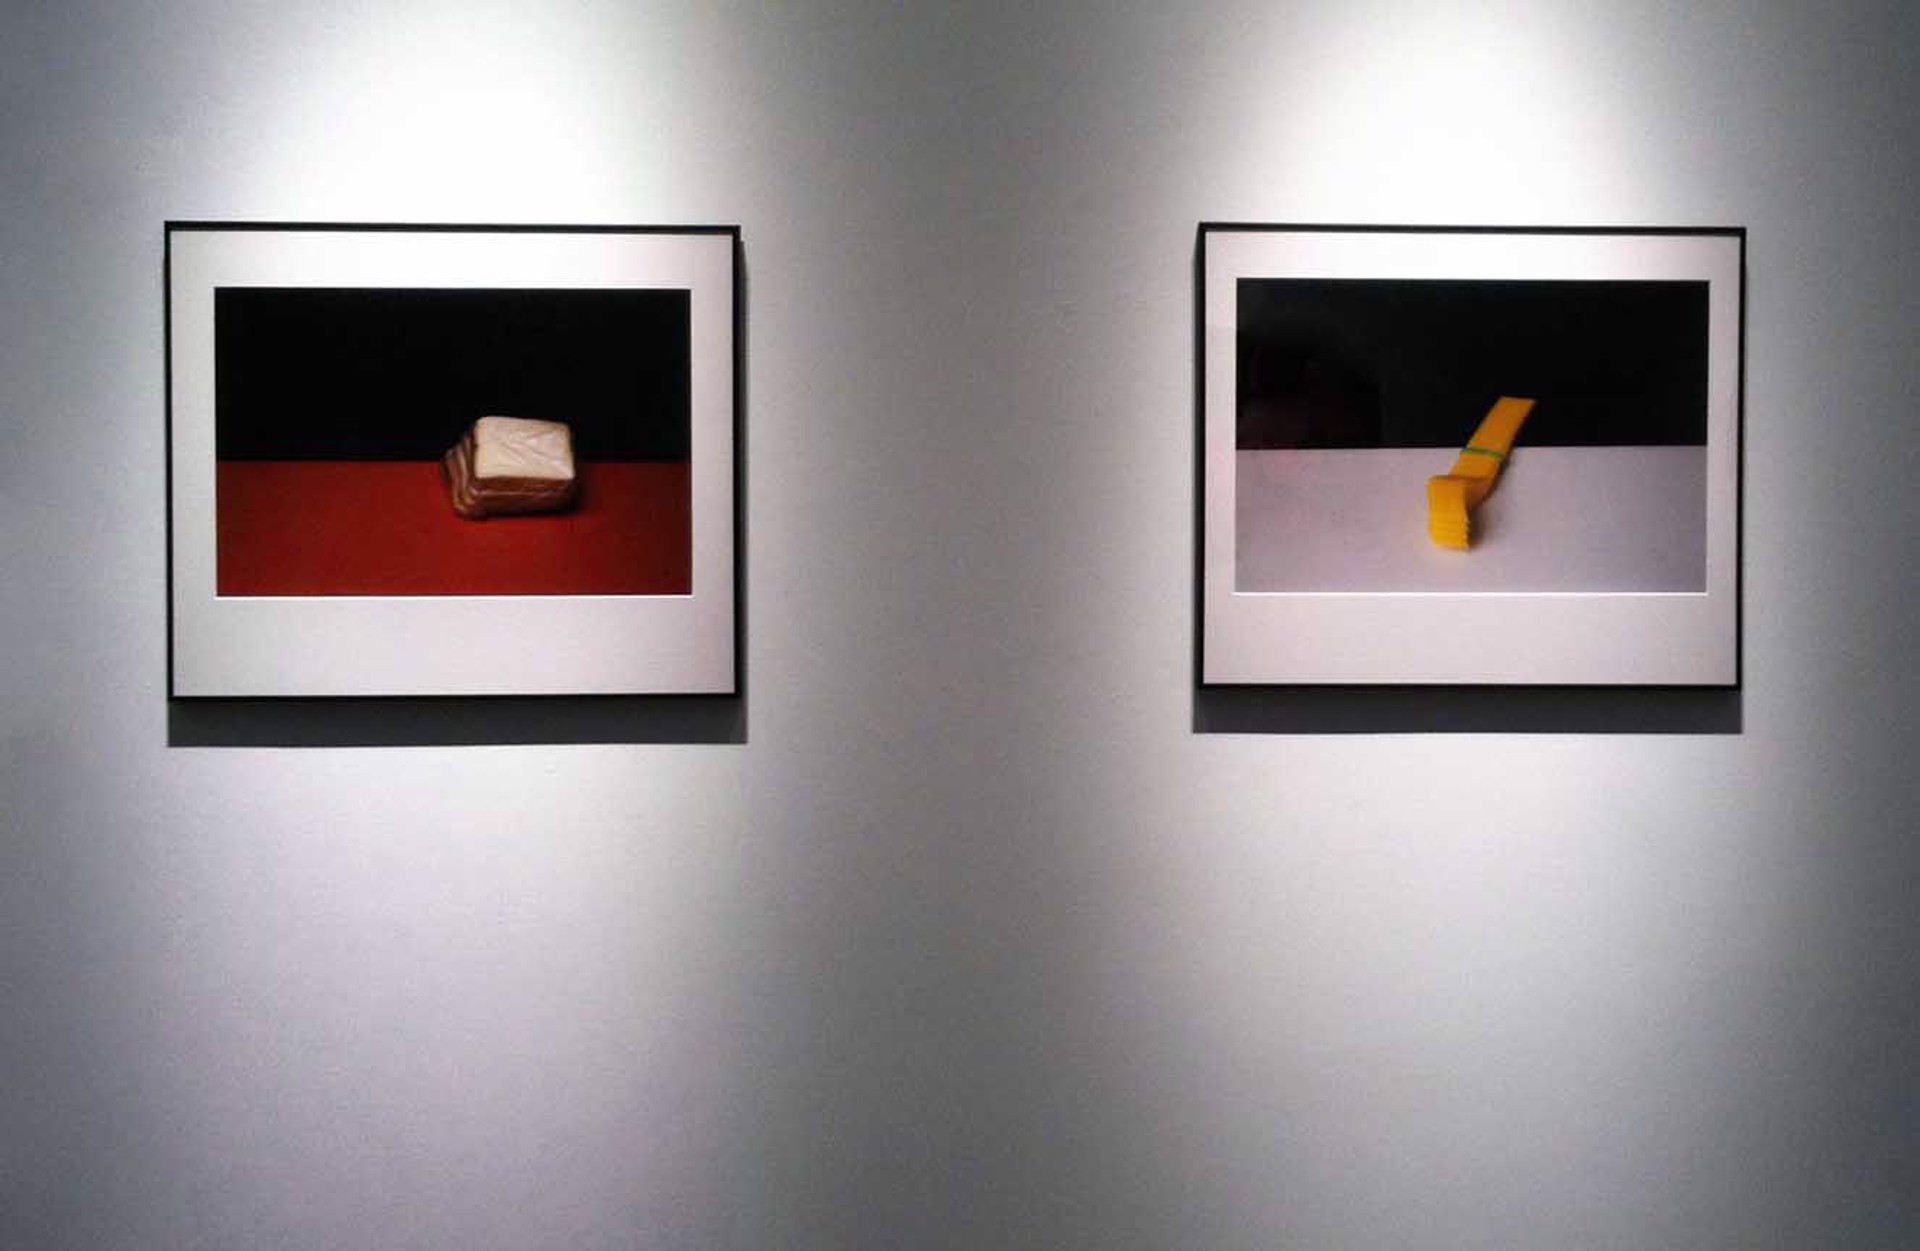 "Untitled (Bread)" (left), "Untitled (Forks)" (right) by Vadim Gushchin